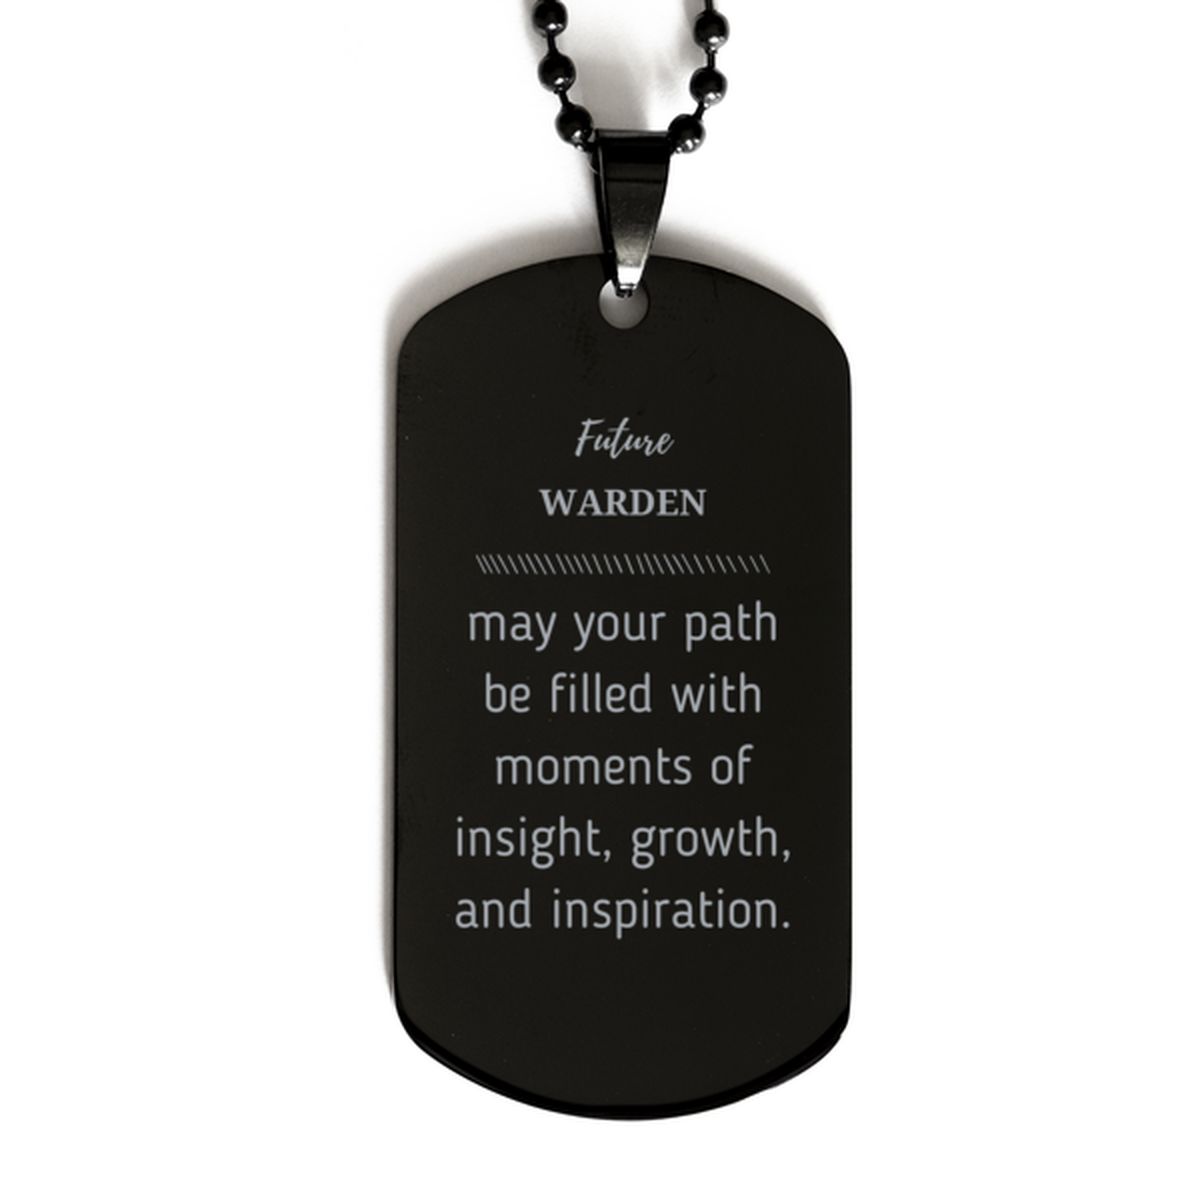 Future Warden Gifts, May your path be filled with moments of insight, Graduation Gifts for New Warden, Christmas Unique Black Dog Tag For Men, Women, Friends